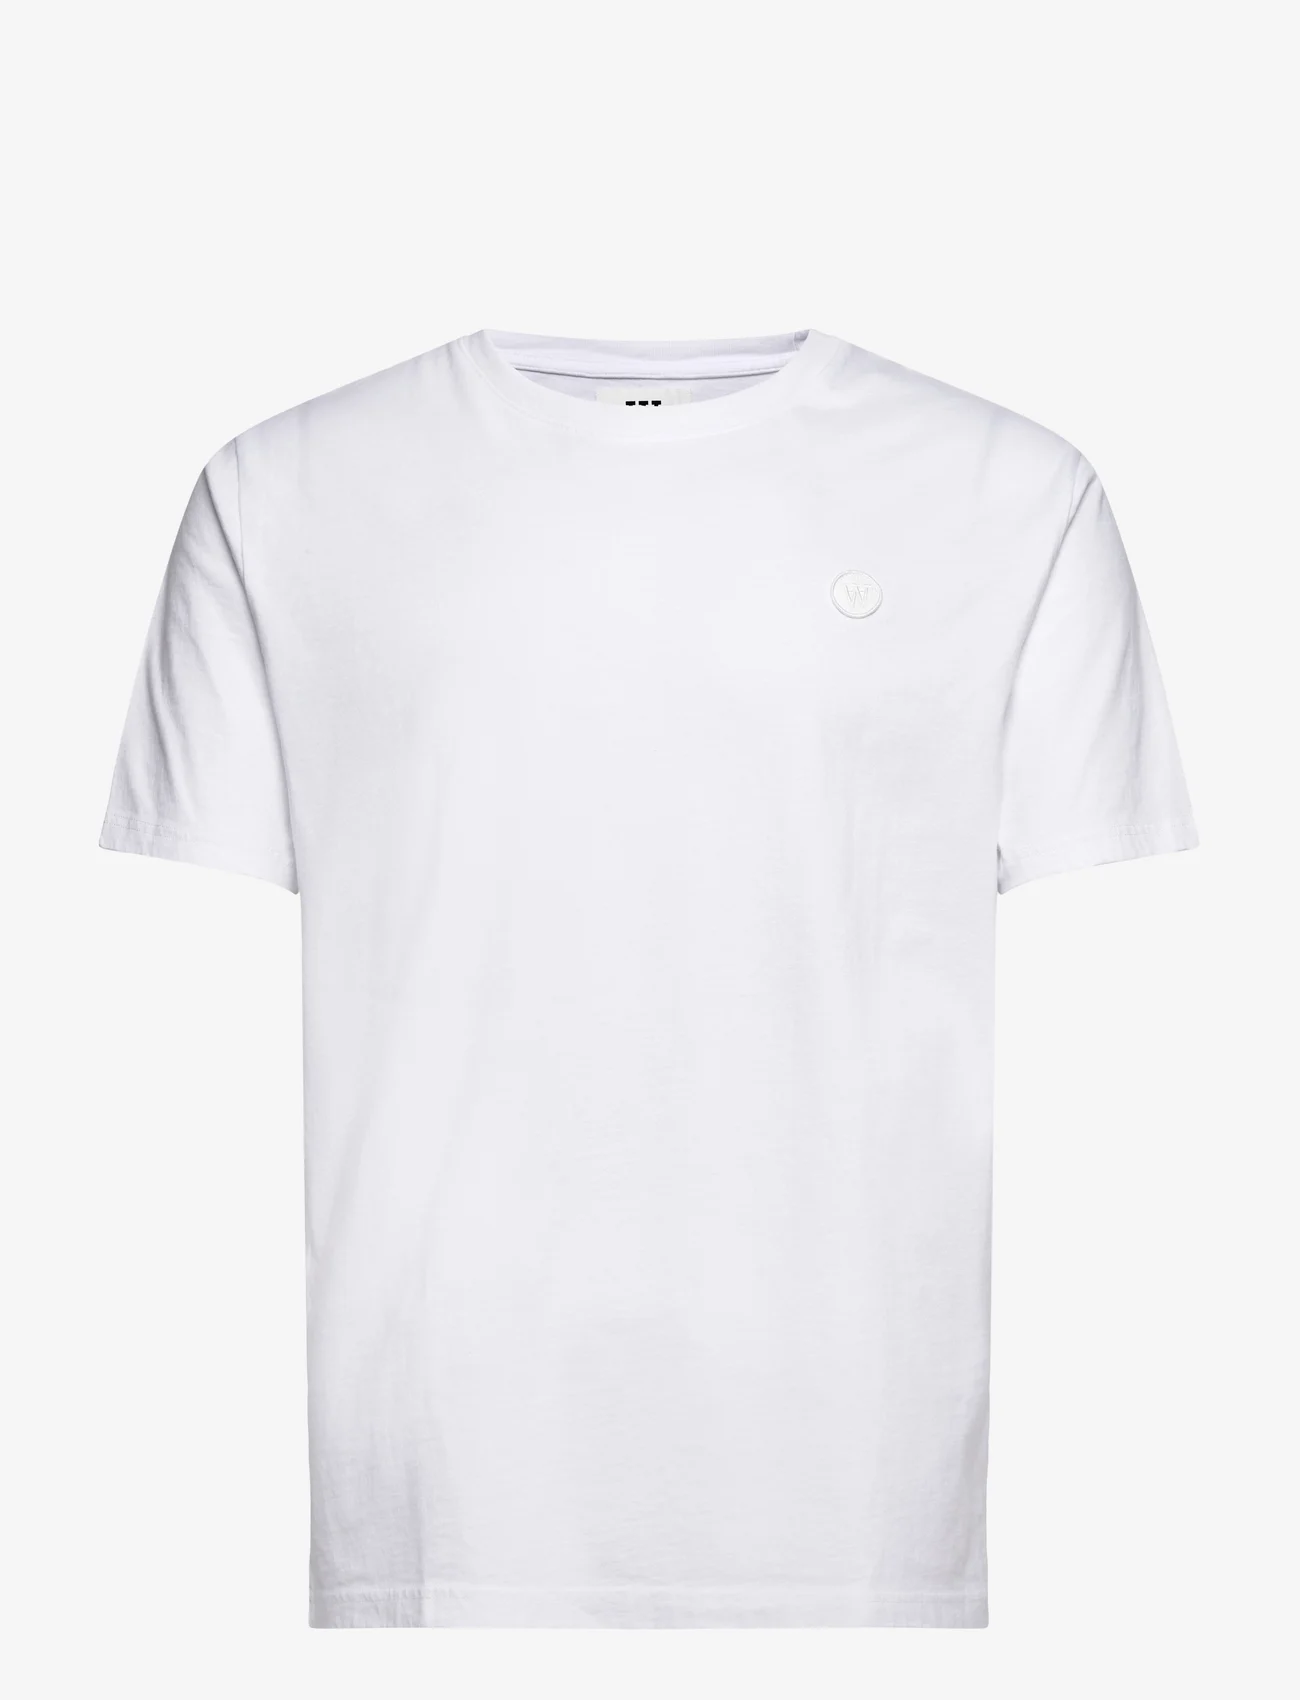 Double A by Wood Wood - Ace T-shirt - short-sleeved - white/white - 0